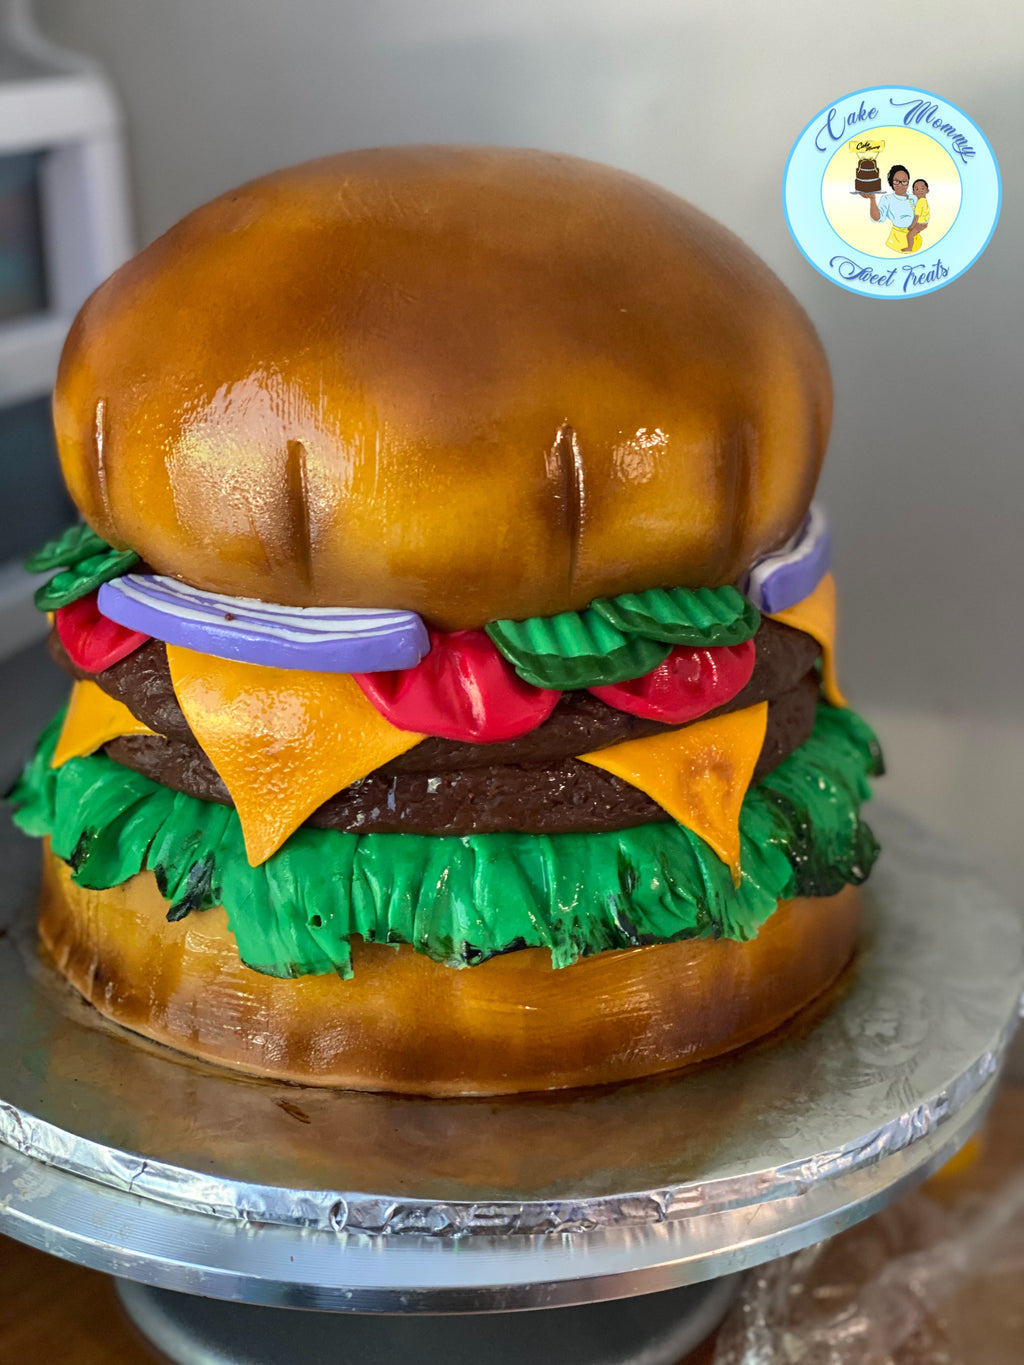 This New York-based Bakery Does Bespoke Cakes to “Bake Your Dream Cake into  Reality” - ClickTheCity